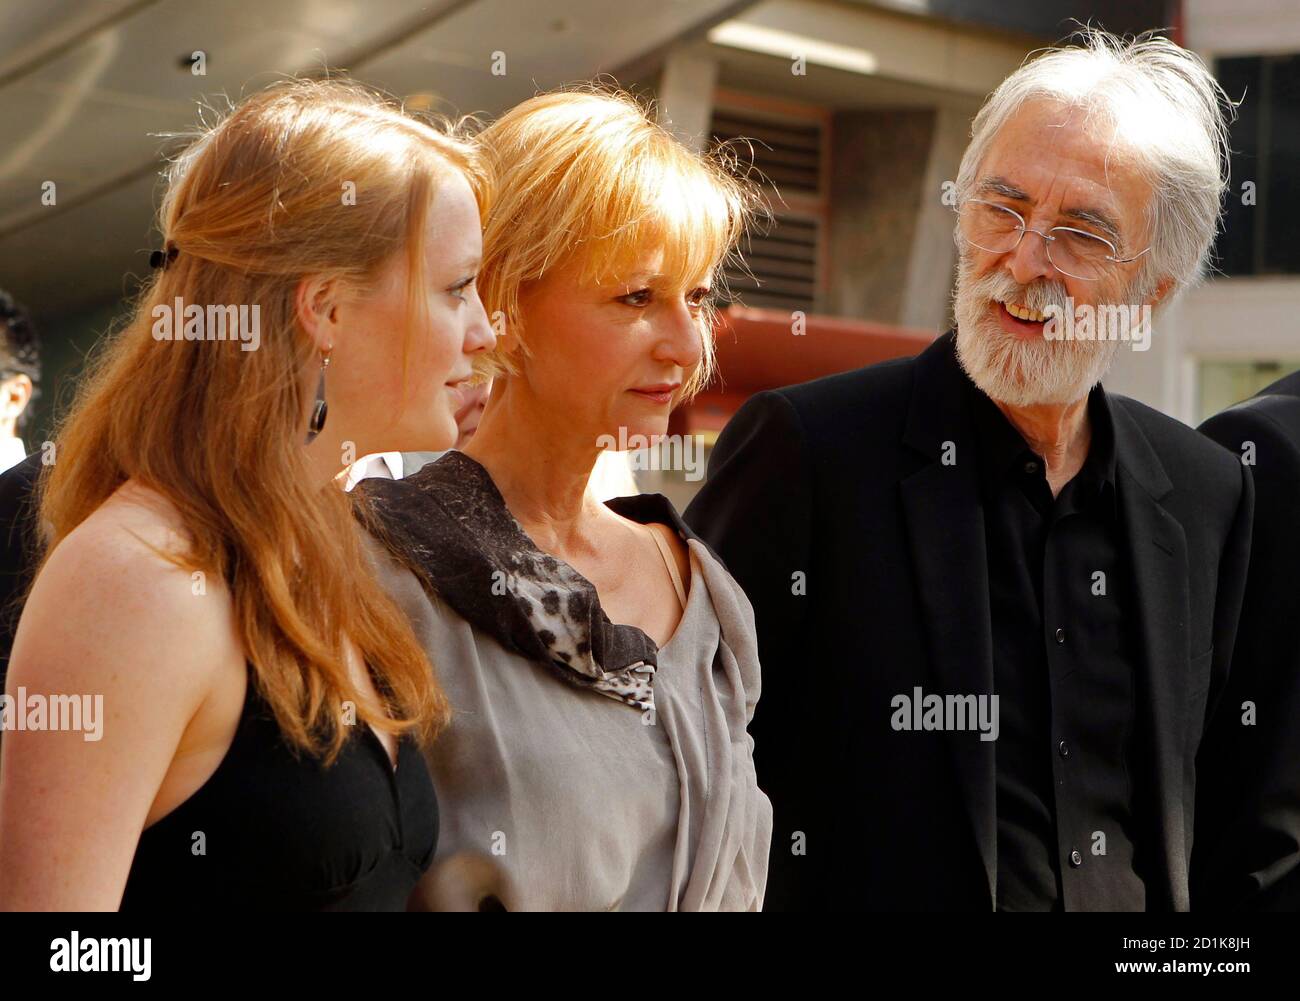 Actress (L-R) Leonie Benesch, actress Susanne Lothar and director Michael Haneke from the German film 'The White Ribbon (Das Weisse Band)', which is nominated for a best foreign language film award, arrive to meet members of the media ahead of the 82nd Academy Awards in Hollywood, March 5, 2010.  REUTERS/Brian Snyder  (UNITED STATES - Tags: ENTERTAINMENT) Stock Photo